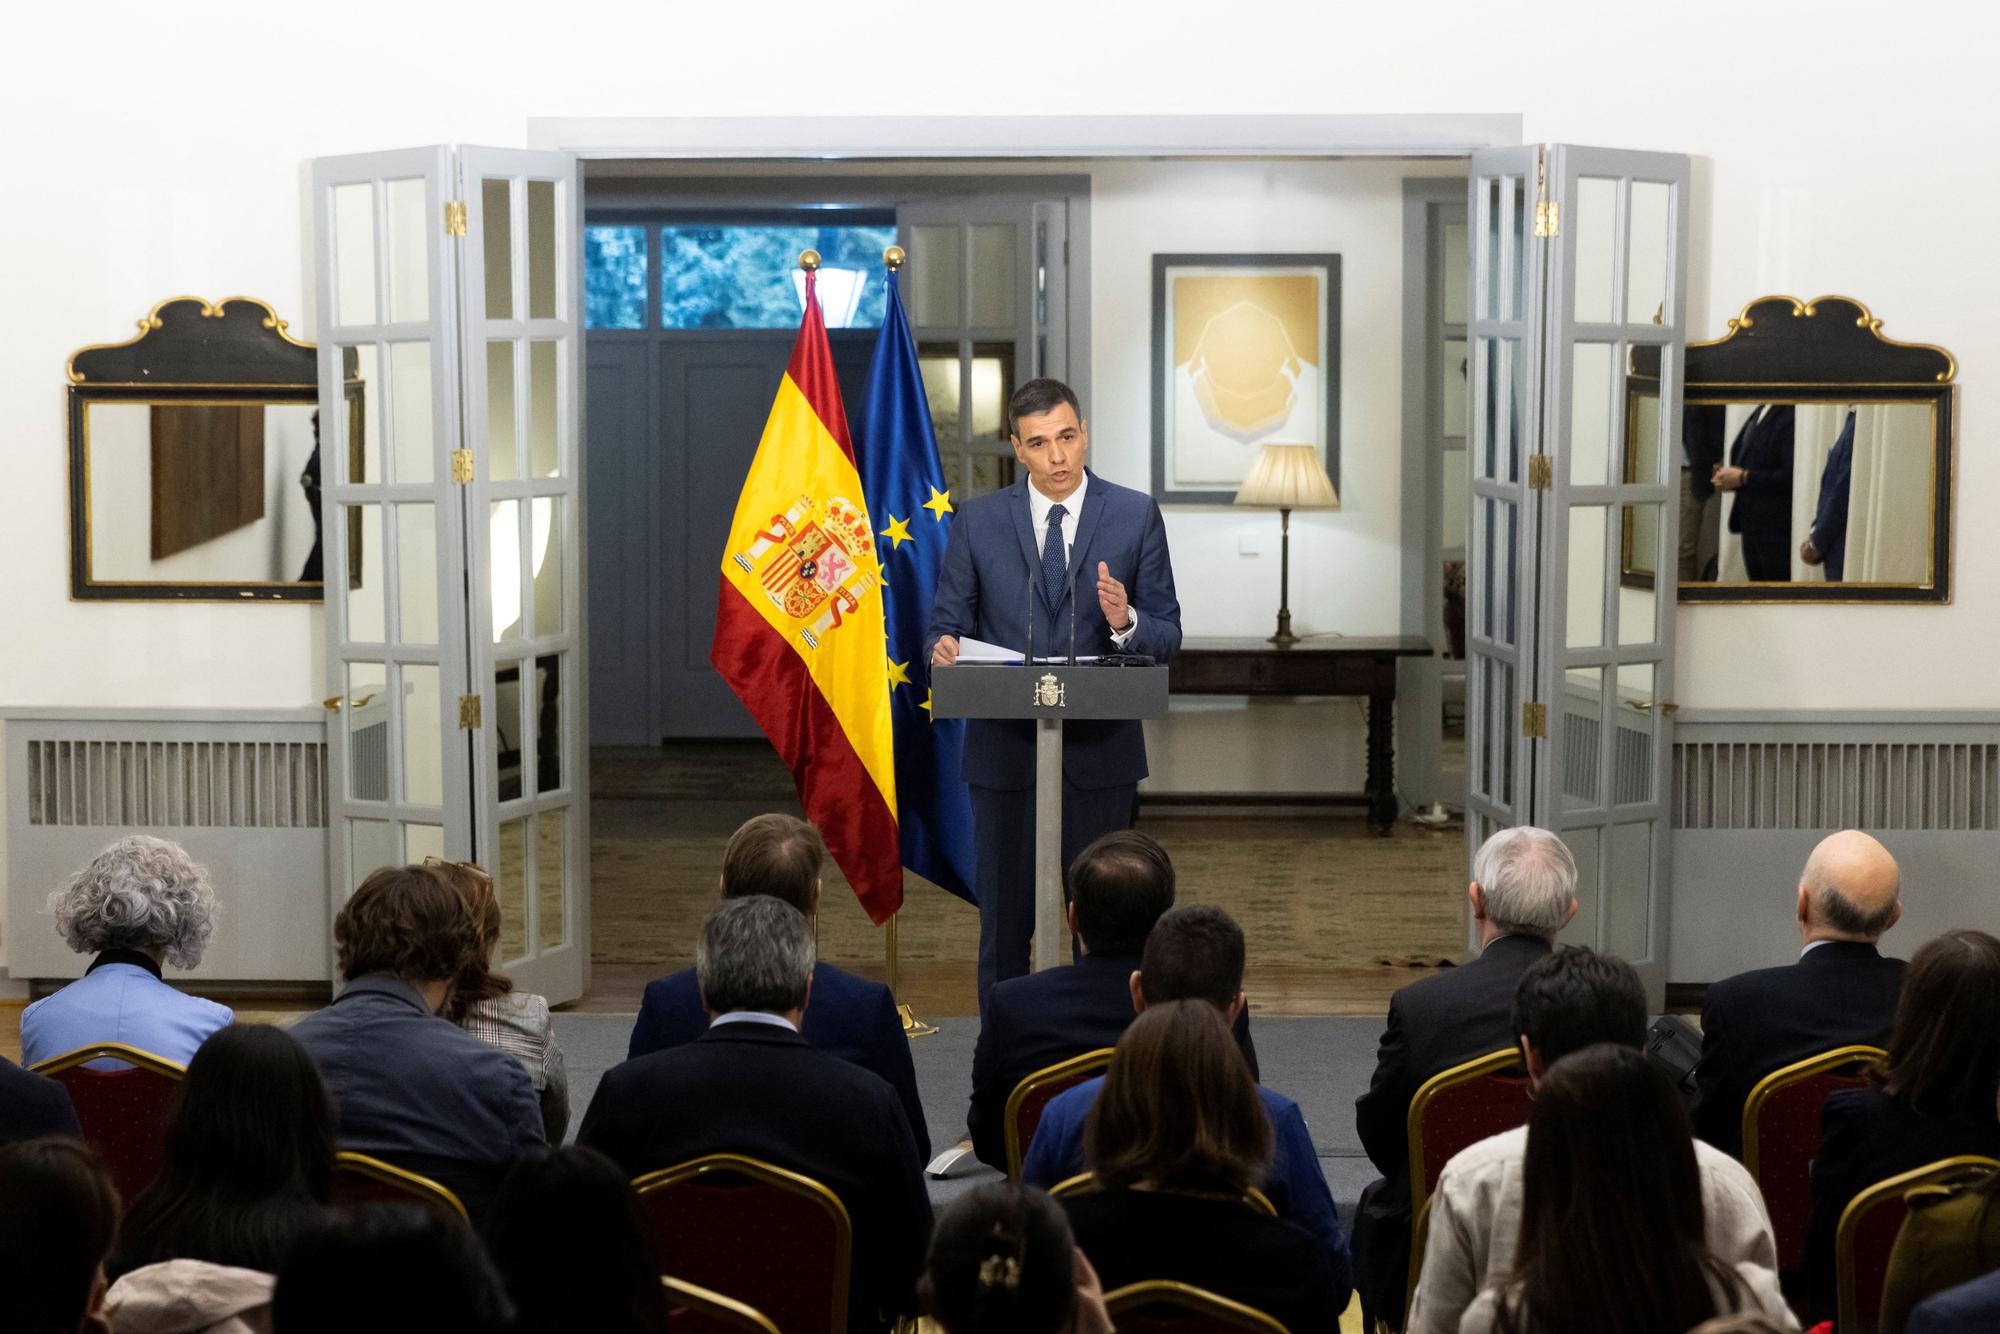 Spanish Prime Minister Pedro Sanchez attends a news conference at the Spanish embassy in Beijing